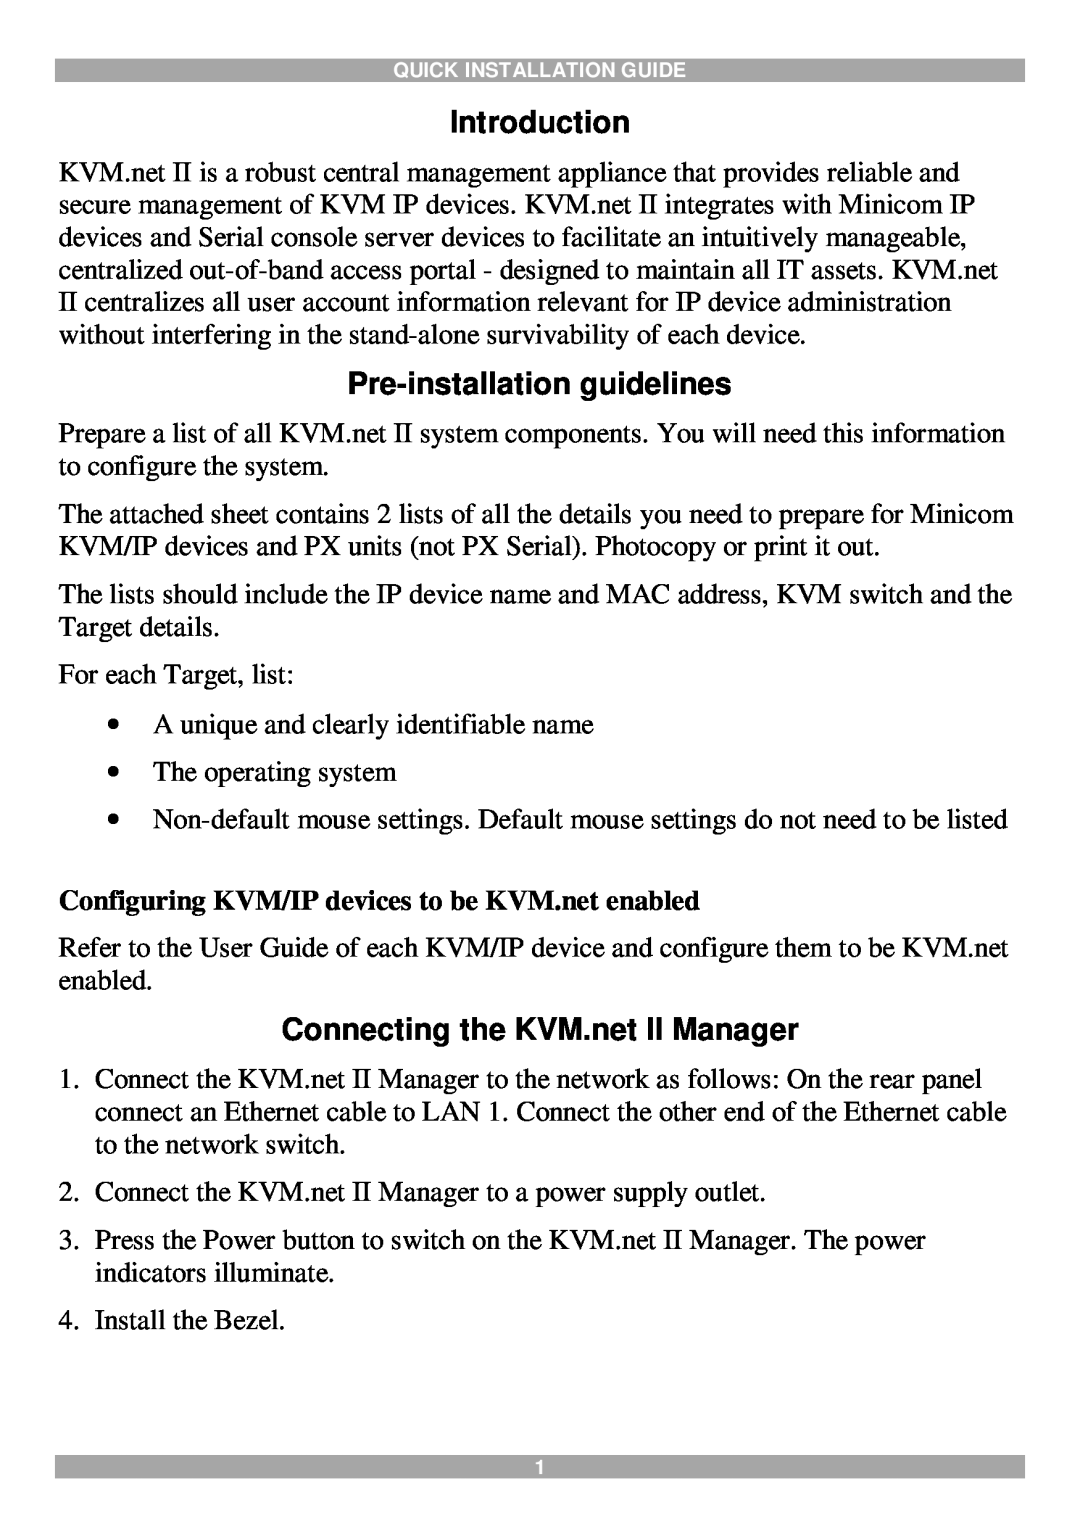 Minicom Advanced Systems manual Introduction, Pre-installation guidelines, Connecting the KVM.net II Manager 